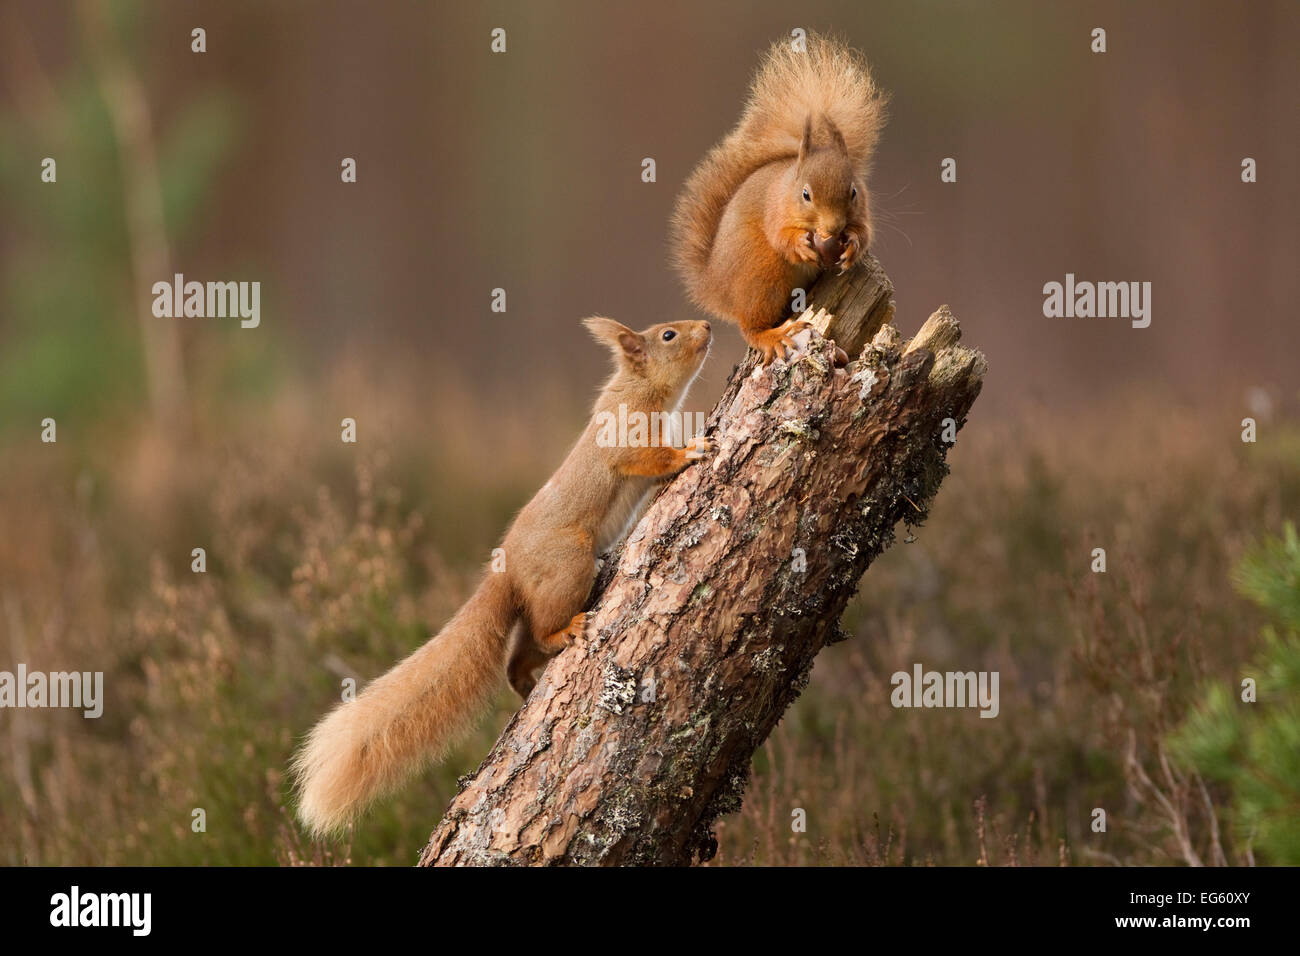 Red squirrel (Sciurus vulgaris) approaching another as it eats a nut, Cairngorms National Park, Scotland, March 2012. Stock Photo